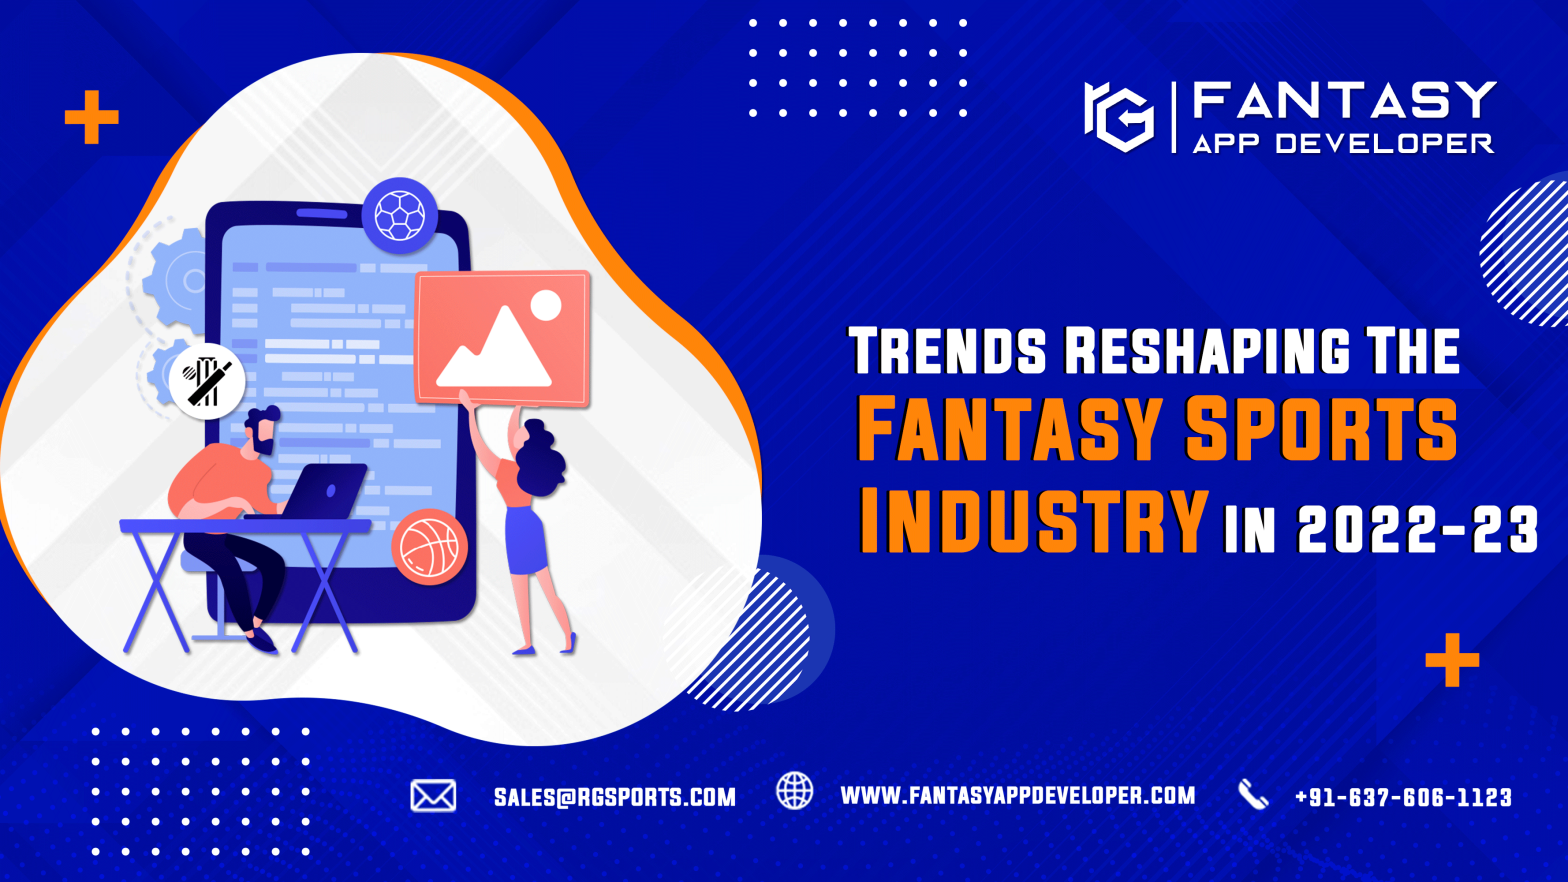 Trends Reshaping the Fantasy Sports Industry In 2022-23